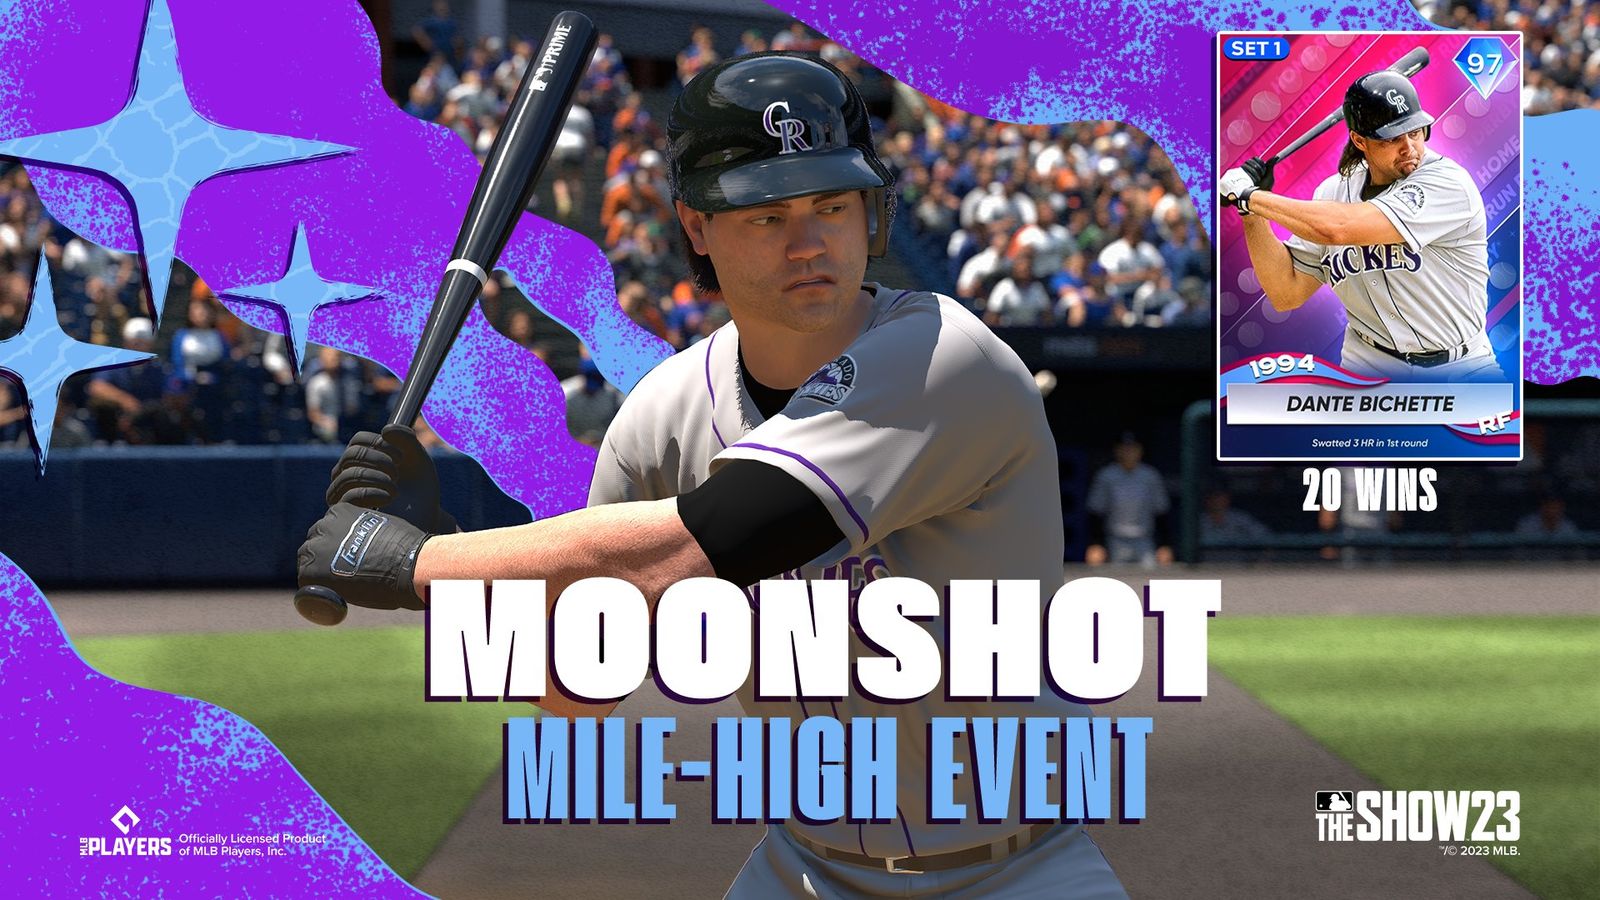 mlb-the-show-23-moonshot-mile-high-event